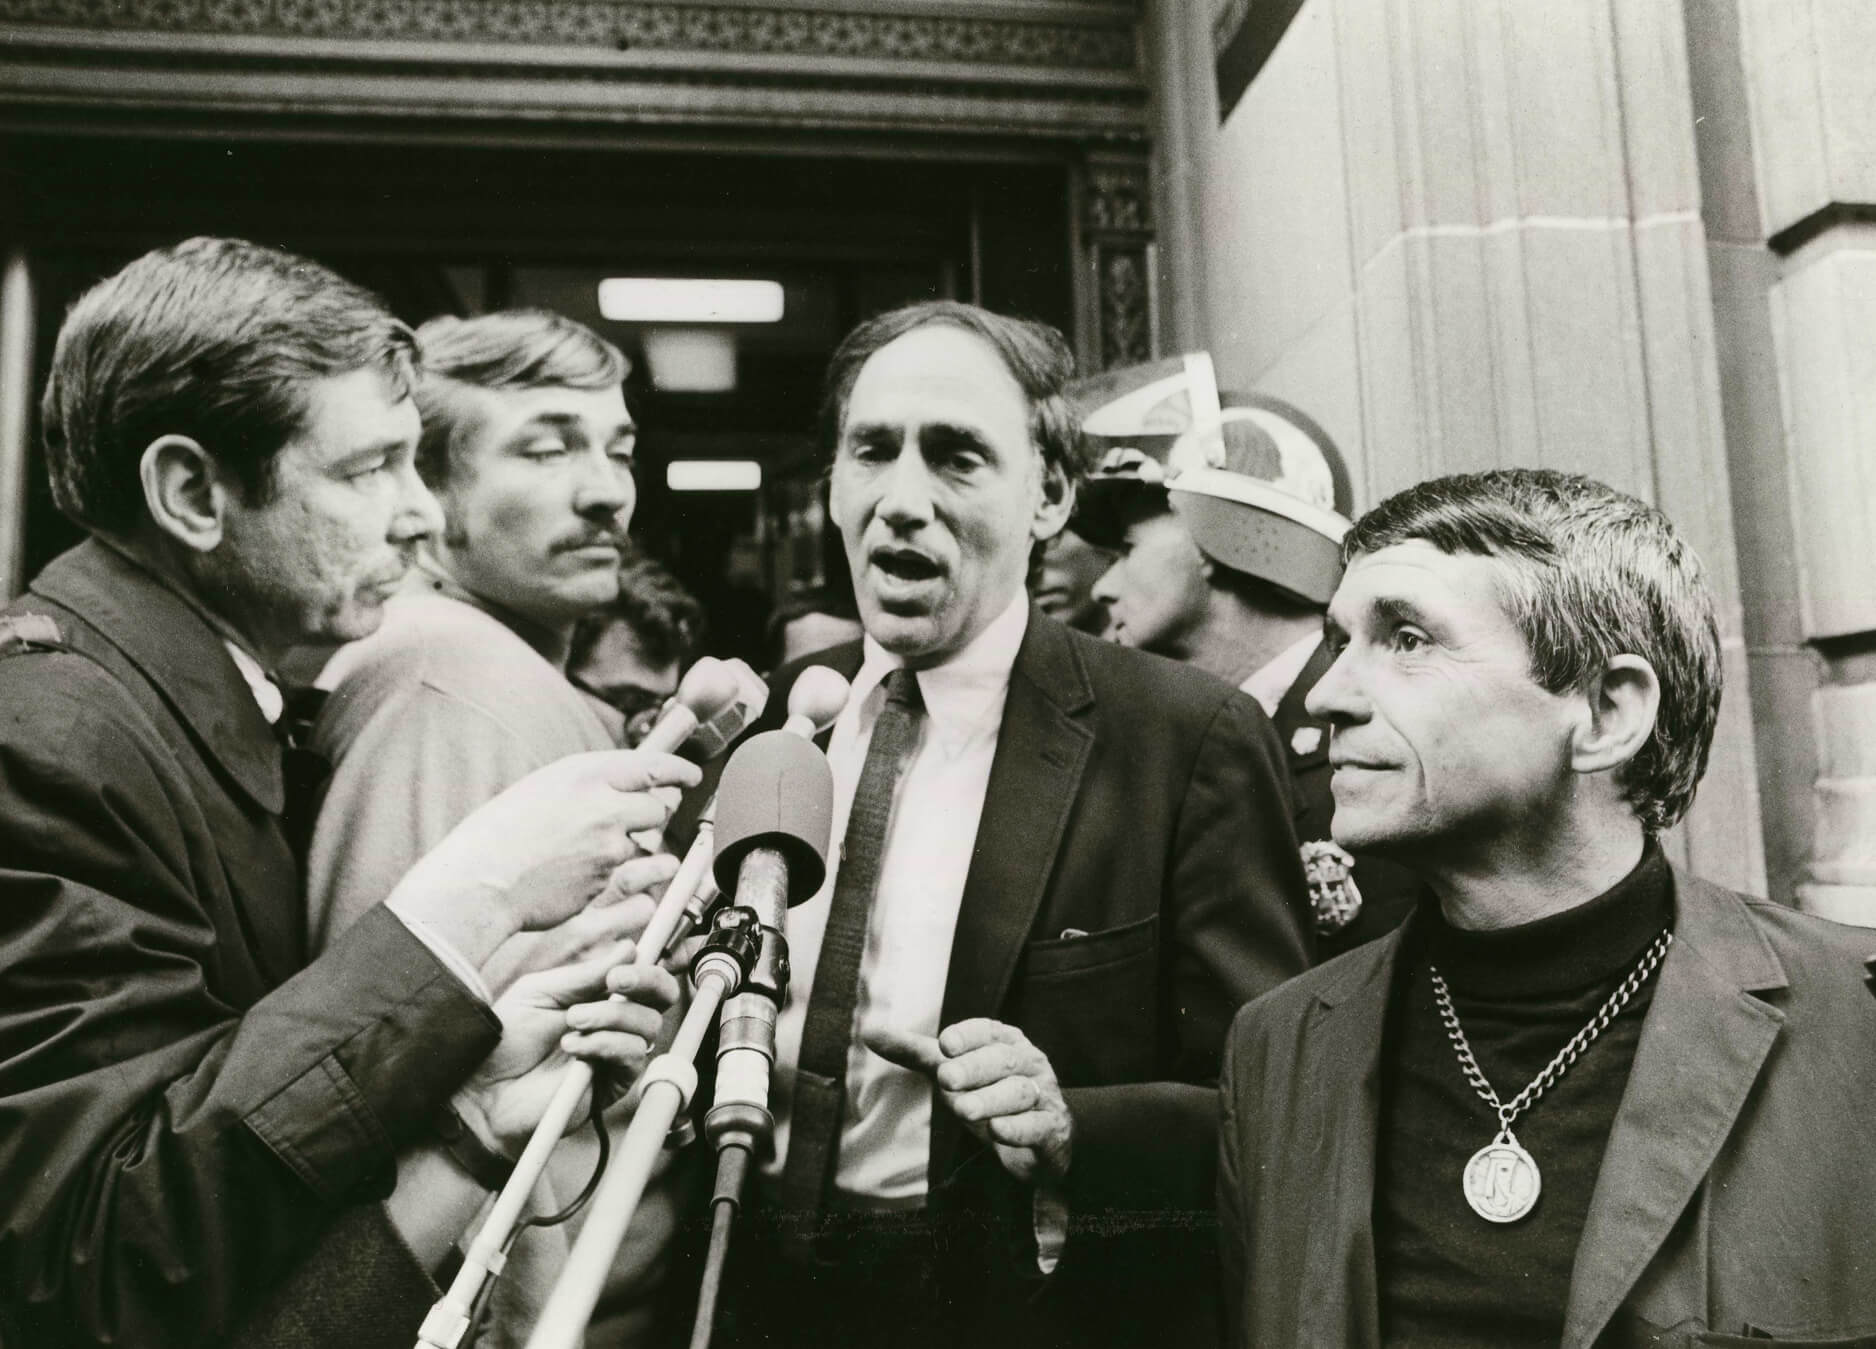 William Kunstler speaking into many microphones, surrounded by several people. Black and white photograph.